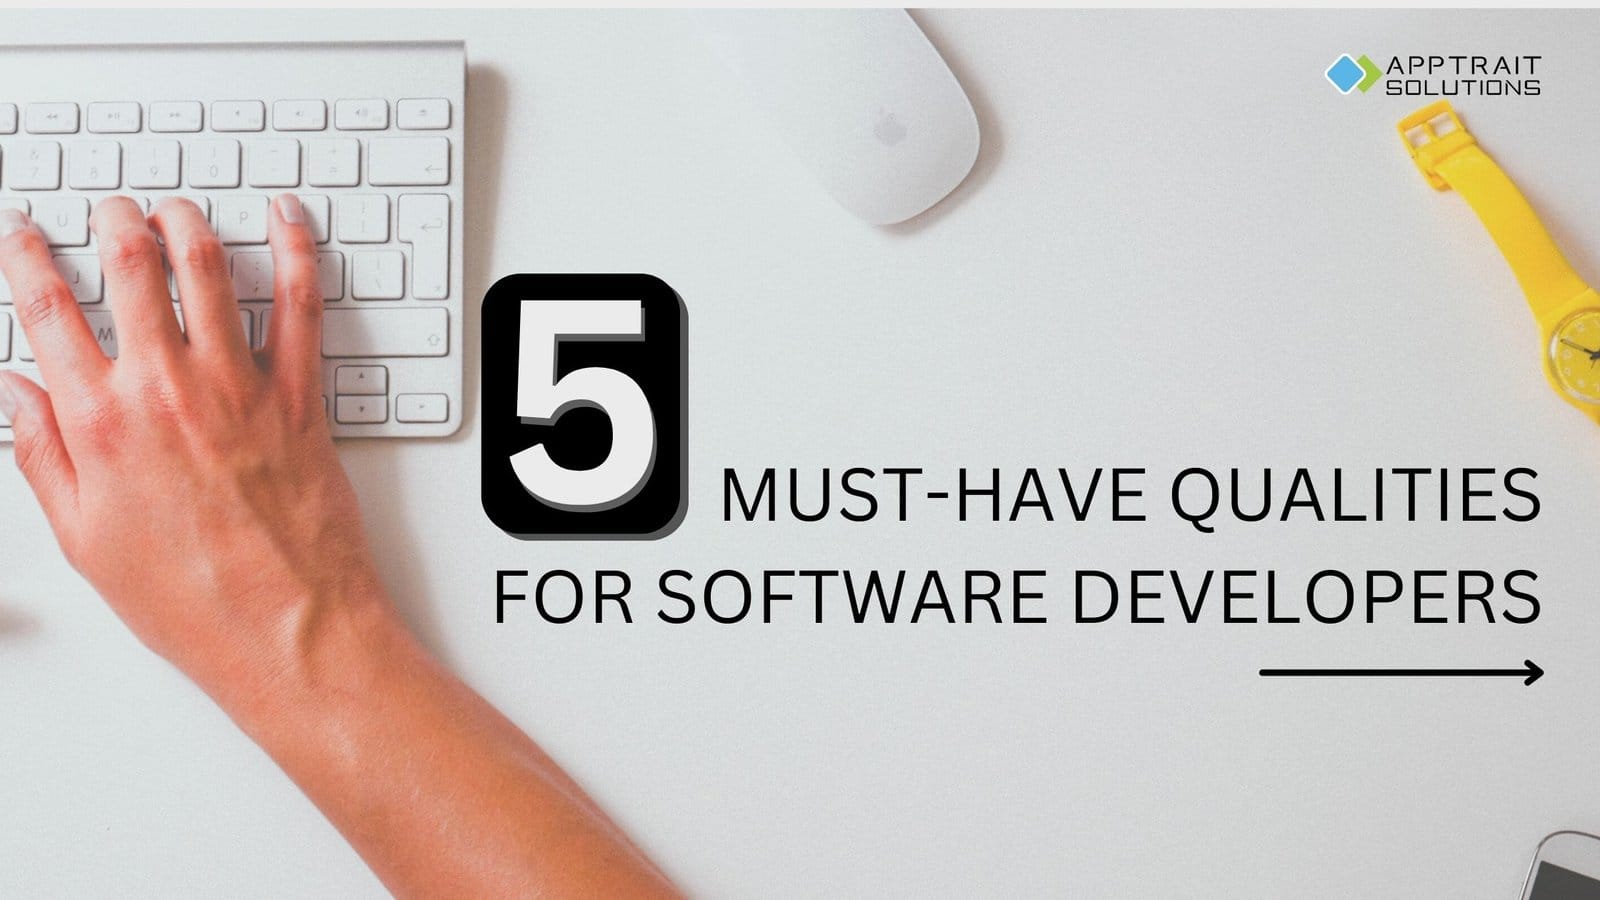 5 must-have qualities for software developers